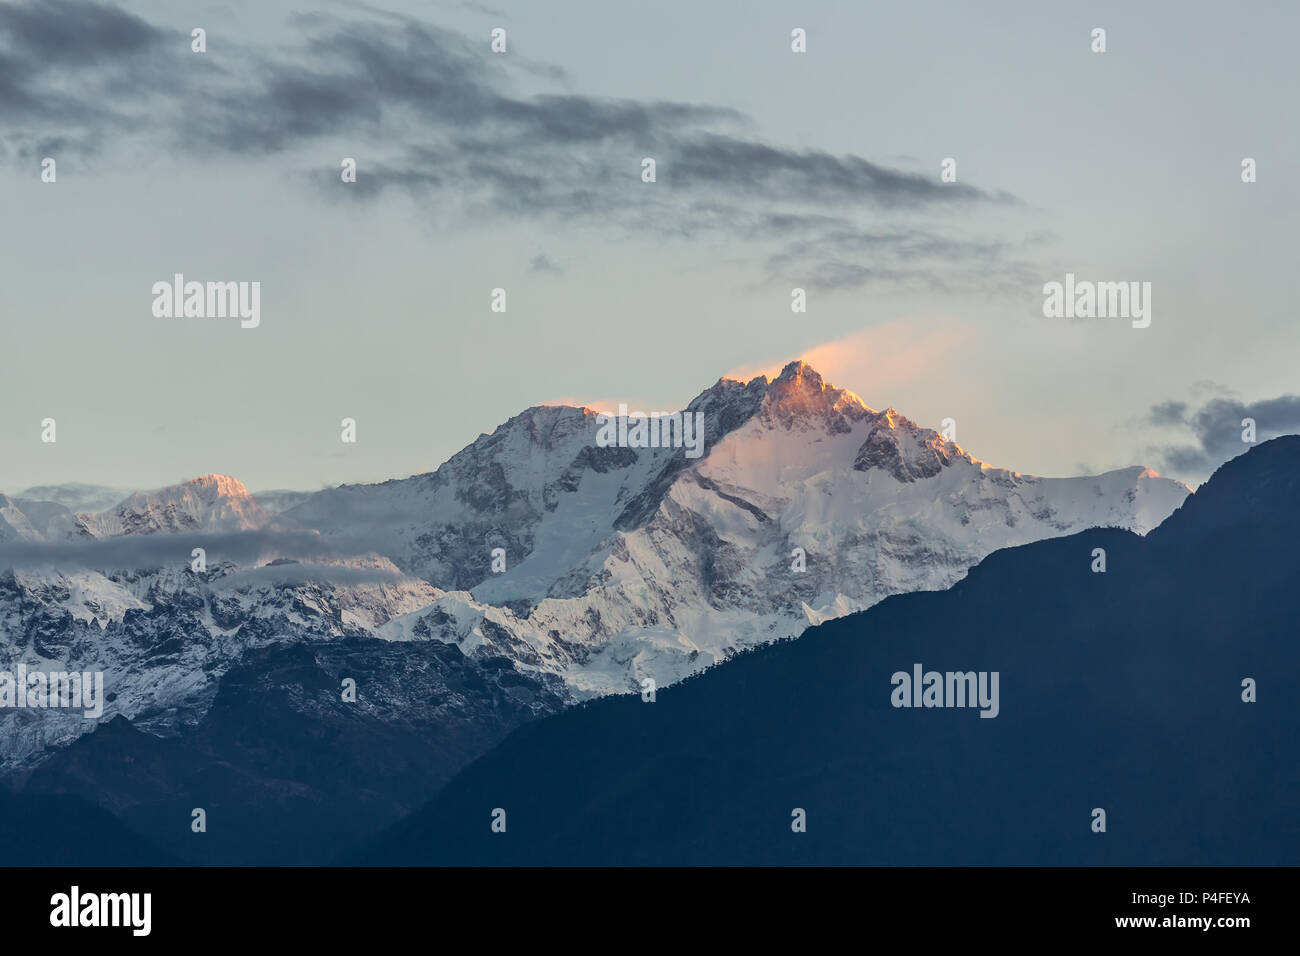 Kangchenjunga mountain at sunrise view from Pelling in Sikkim, India. Kangchenjunga is the third highest mountain in the world. Stock Photo